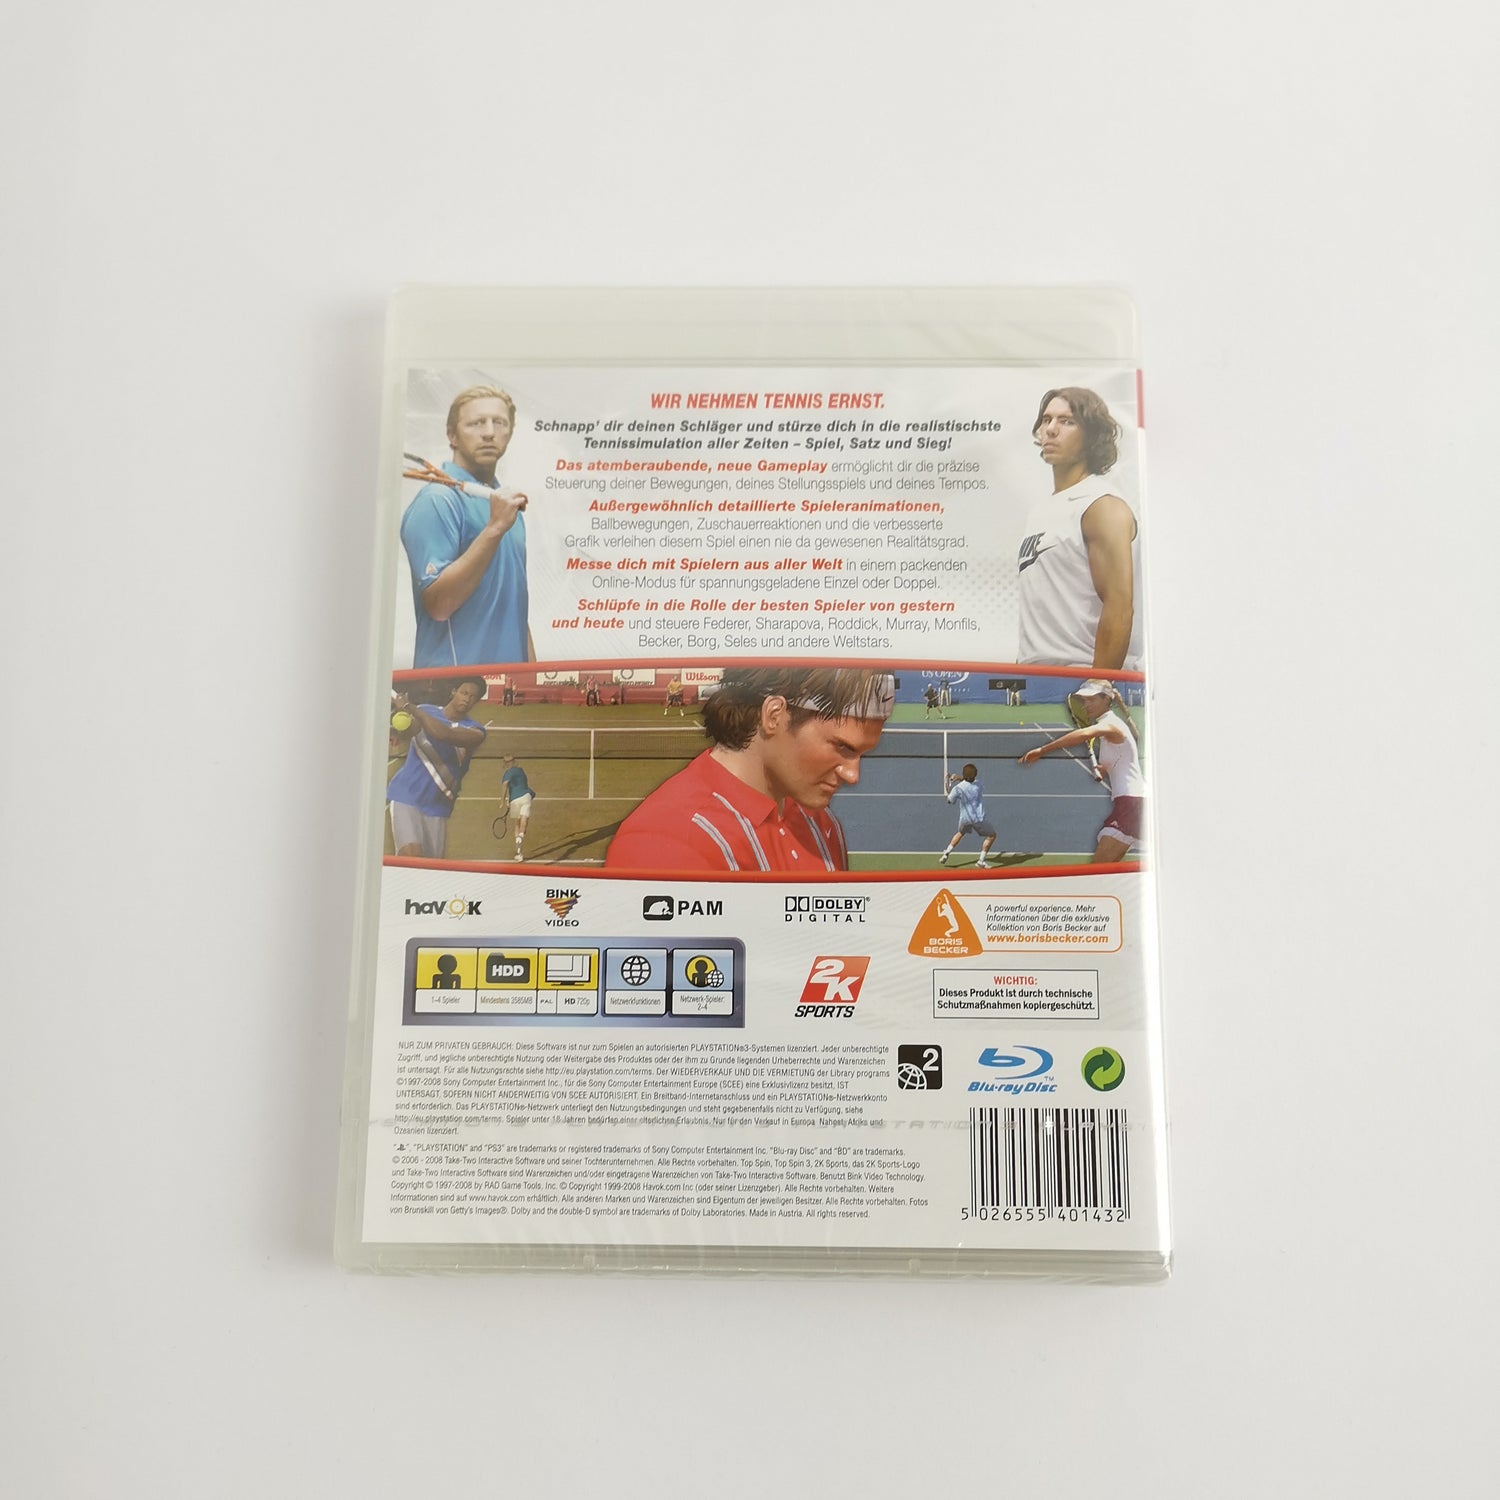 Sony Playstation 3 Game: Topspin 3 Tennis | Original packaging PS3 game - NEW NEW SEALED